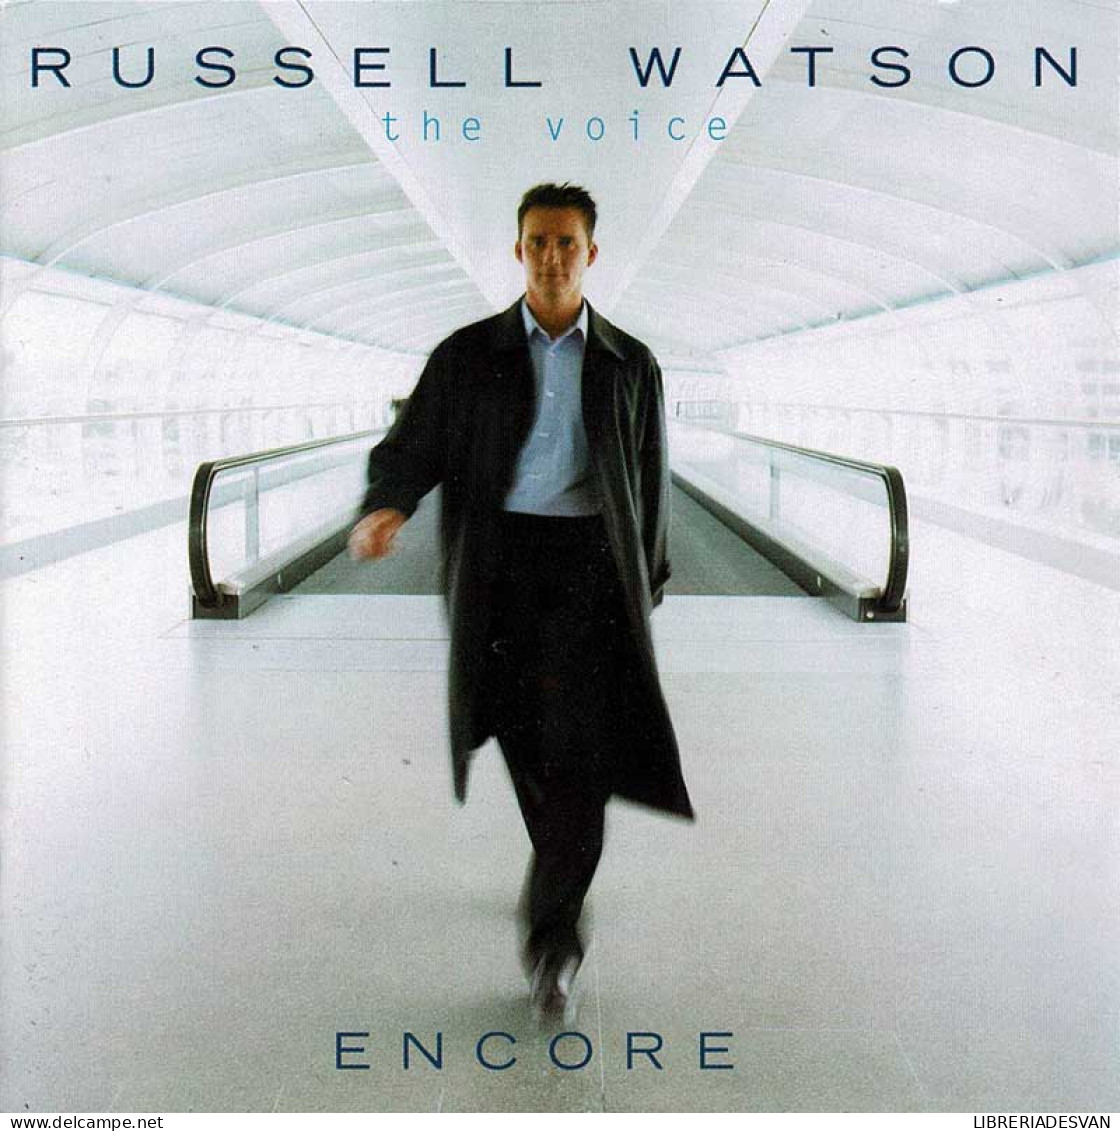 Russell Watson - Encore. CD - Classical